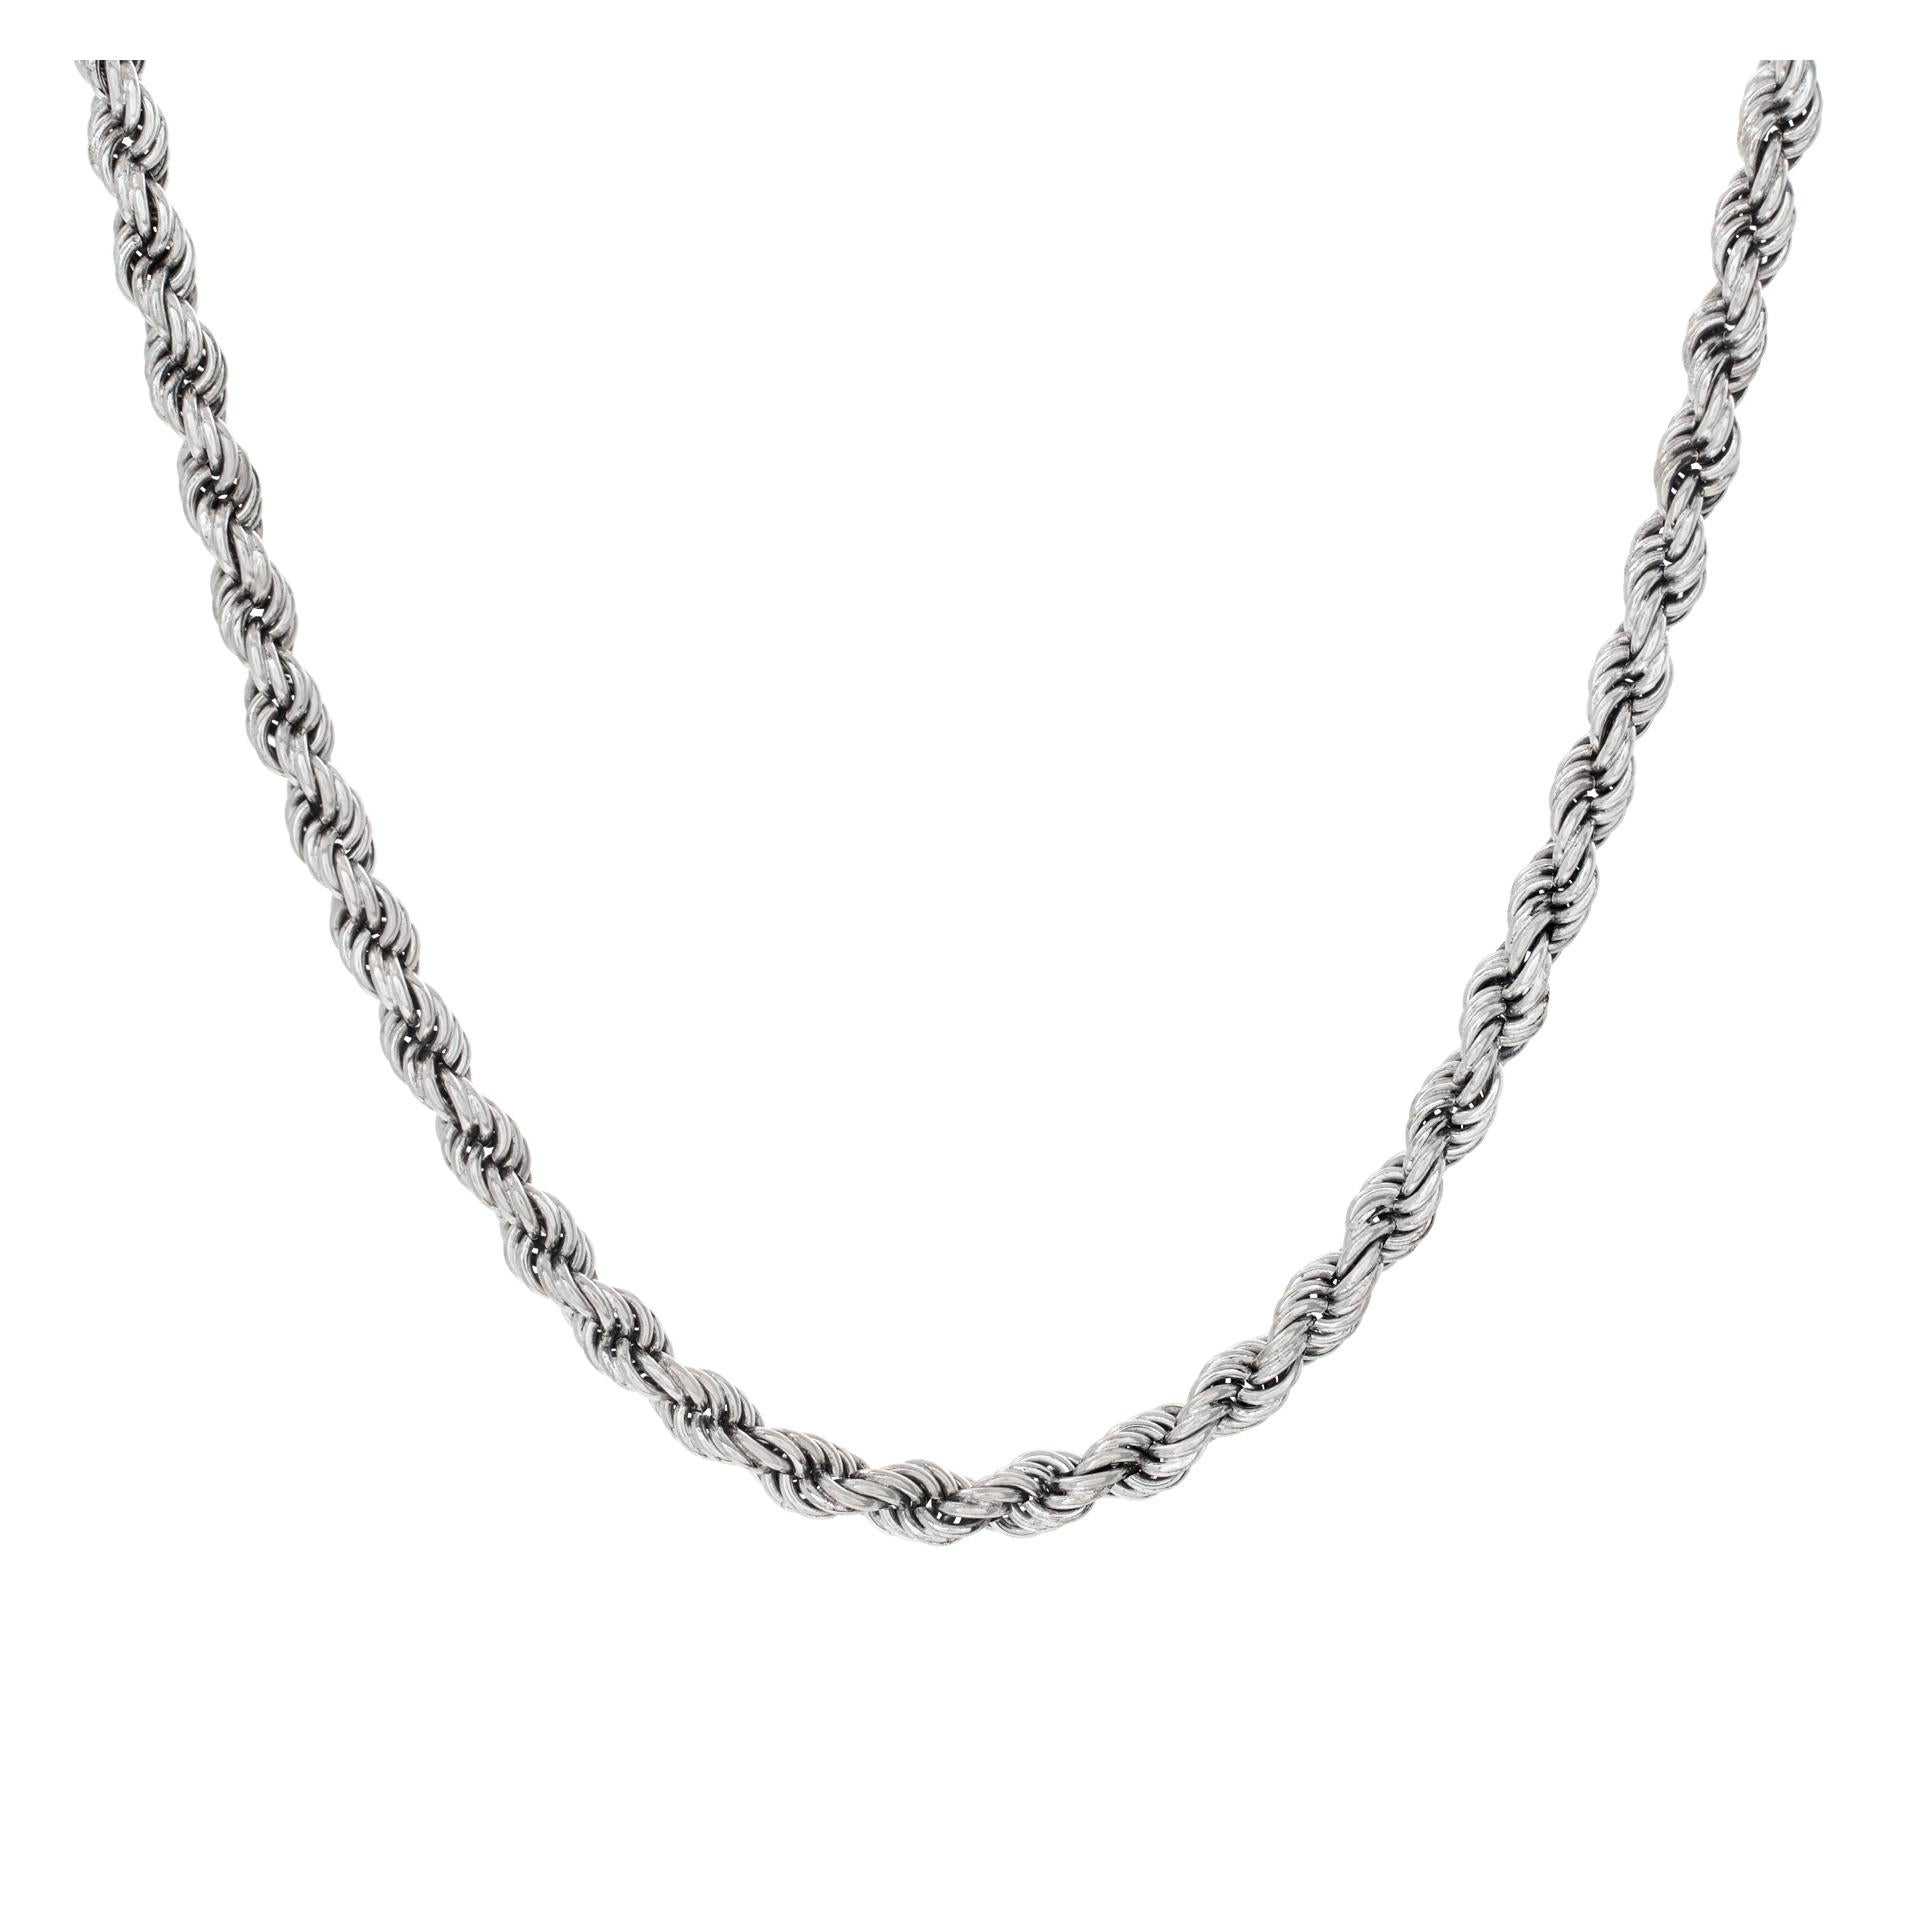 18k white gold necklace. Length 19 inches. 3mm